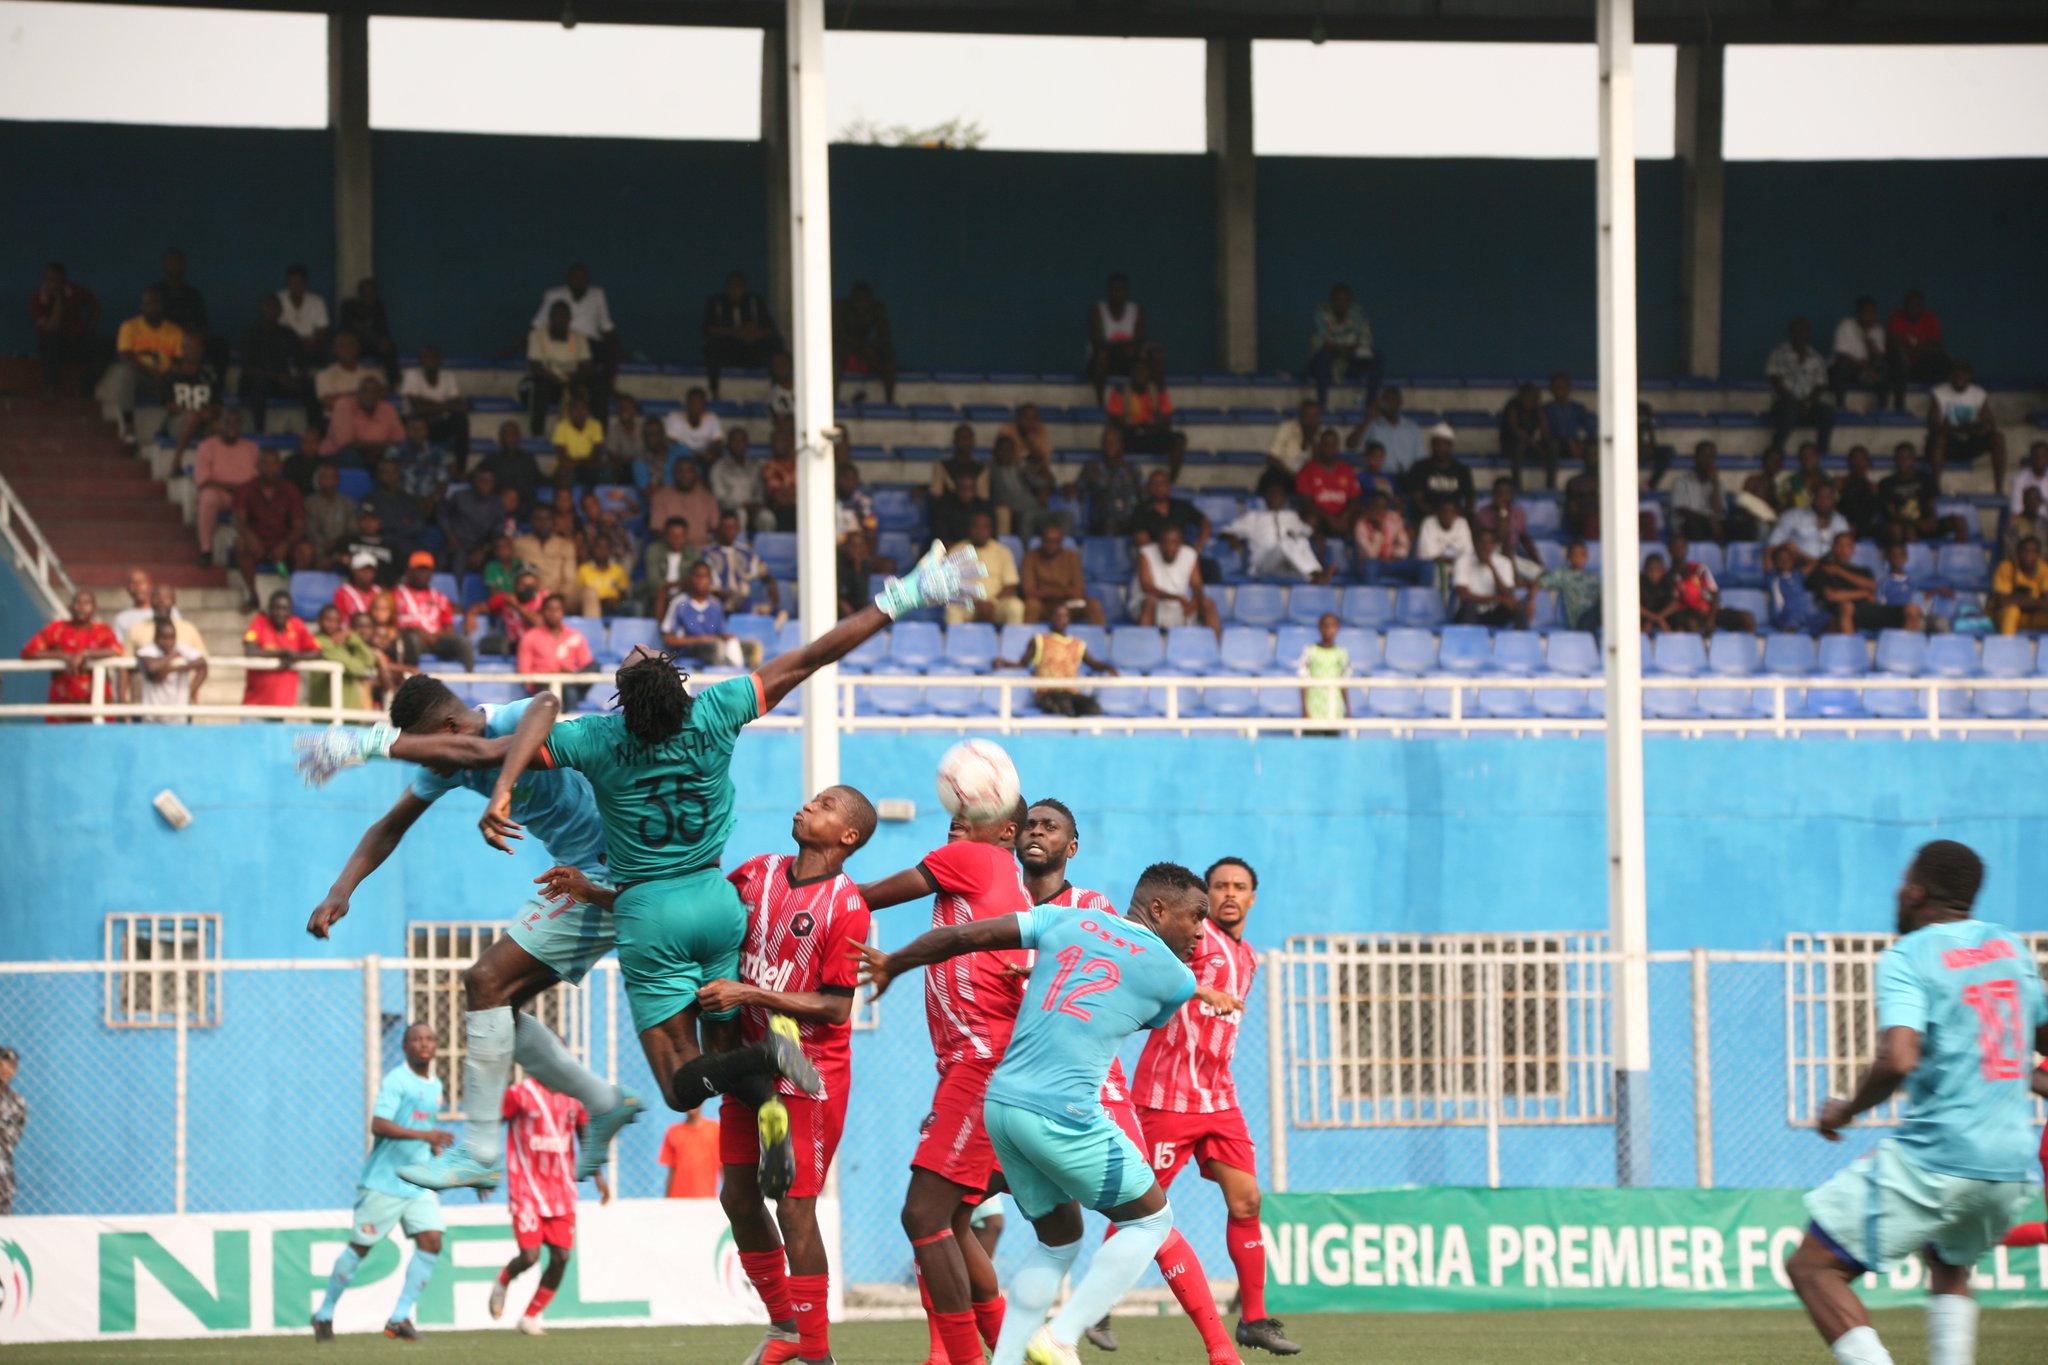 NPFL Review: Remo Stars return to top as Andrew Idoko scores to give Katsina United all points